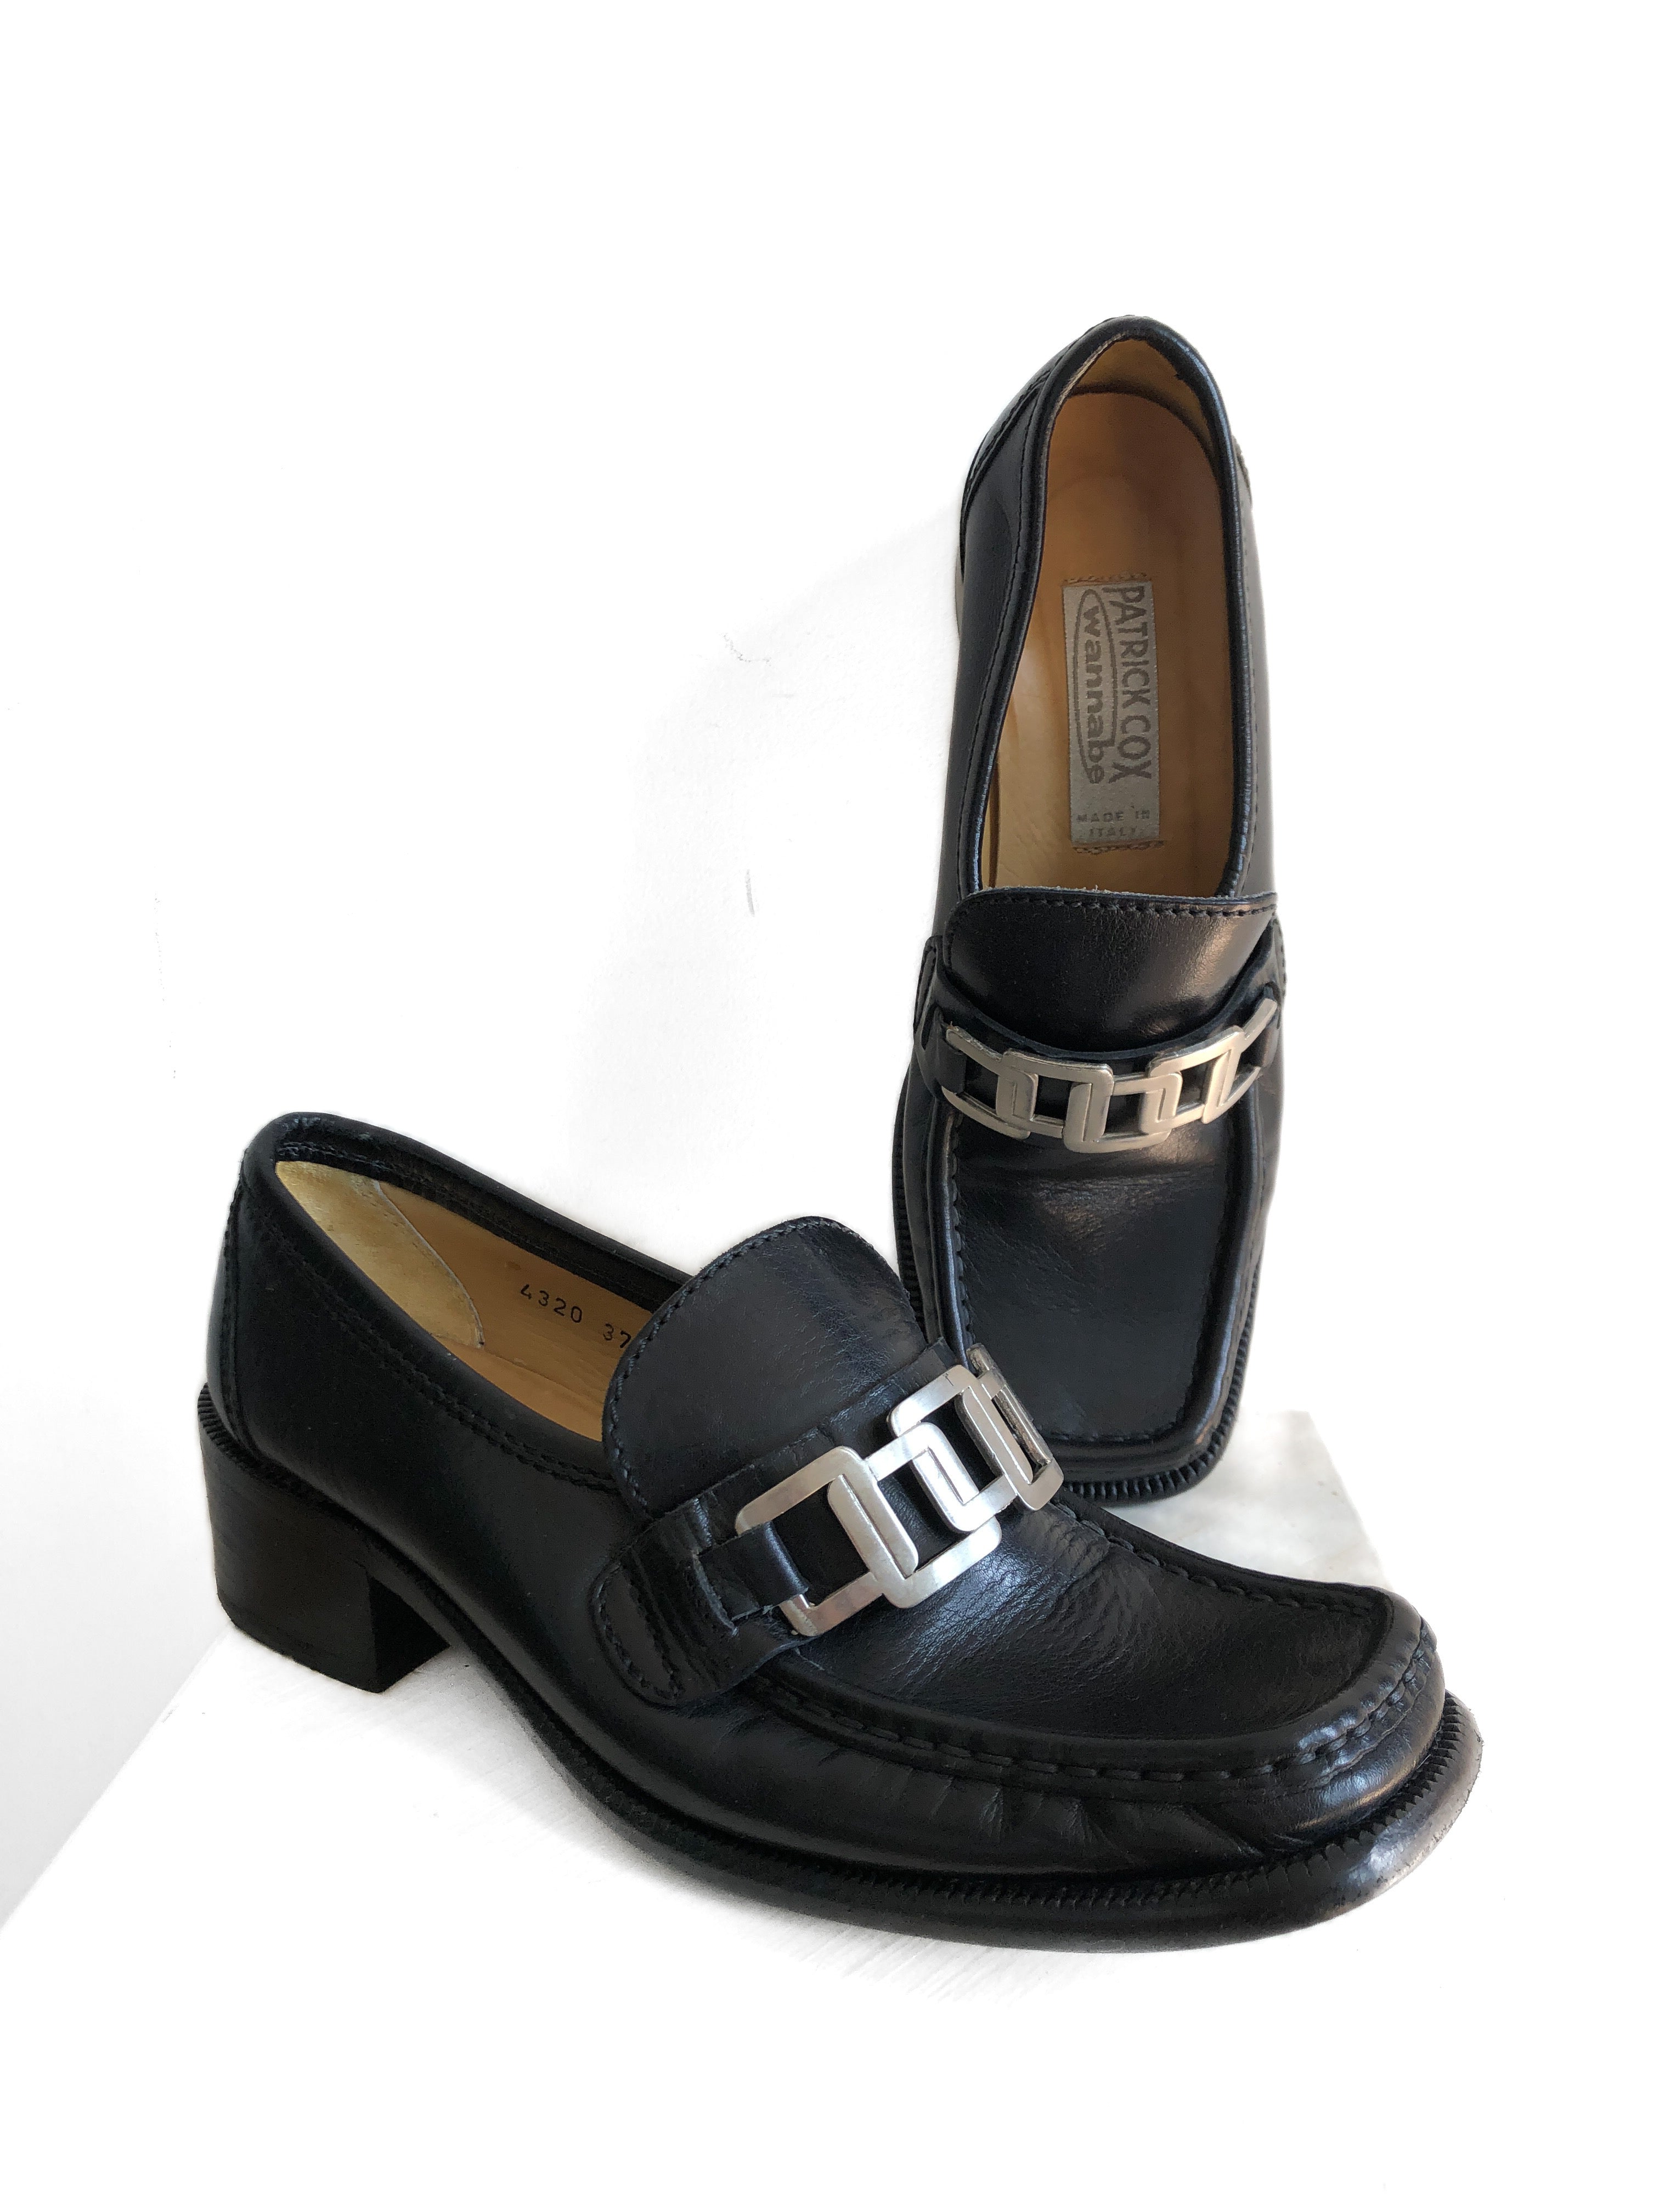 Patrick Cox Wannabe Shoes, Size 37, 90s Vintage Designer Black Leather Loafer with Chunky Heels, Made in Italy